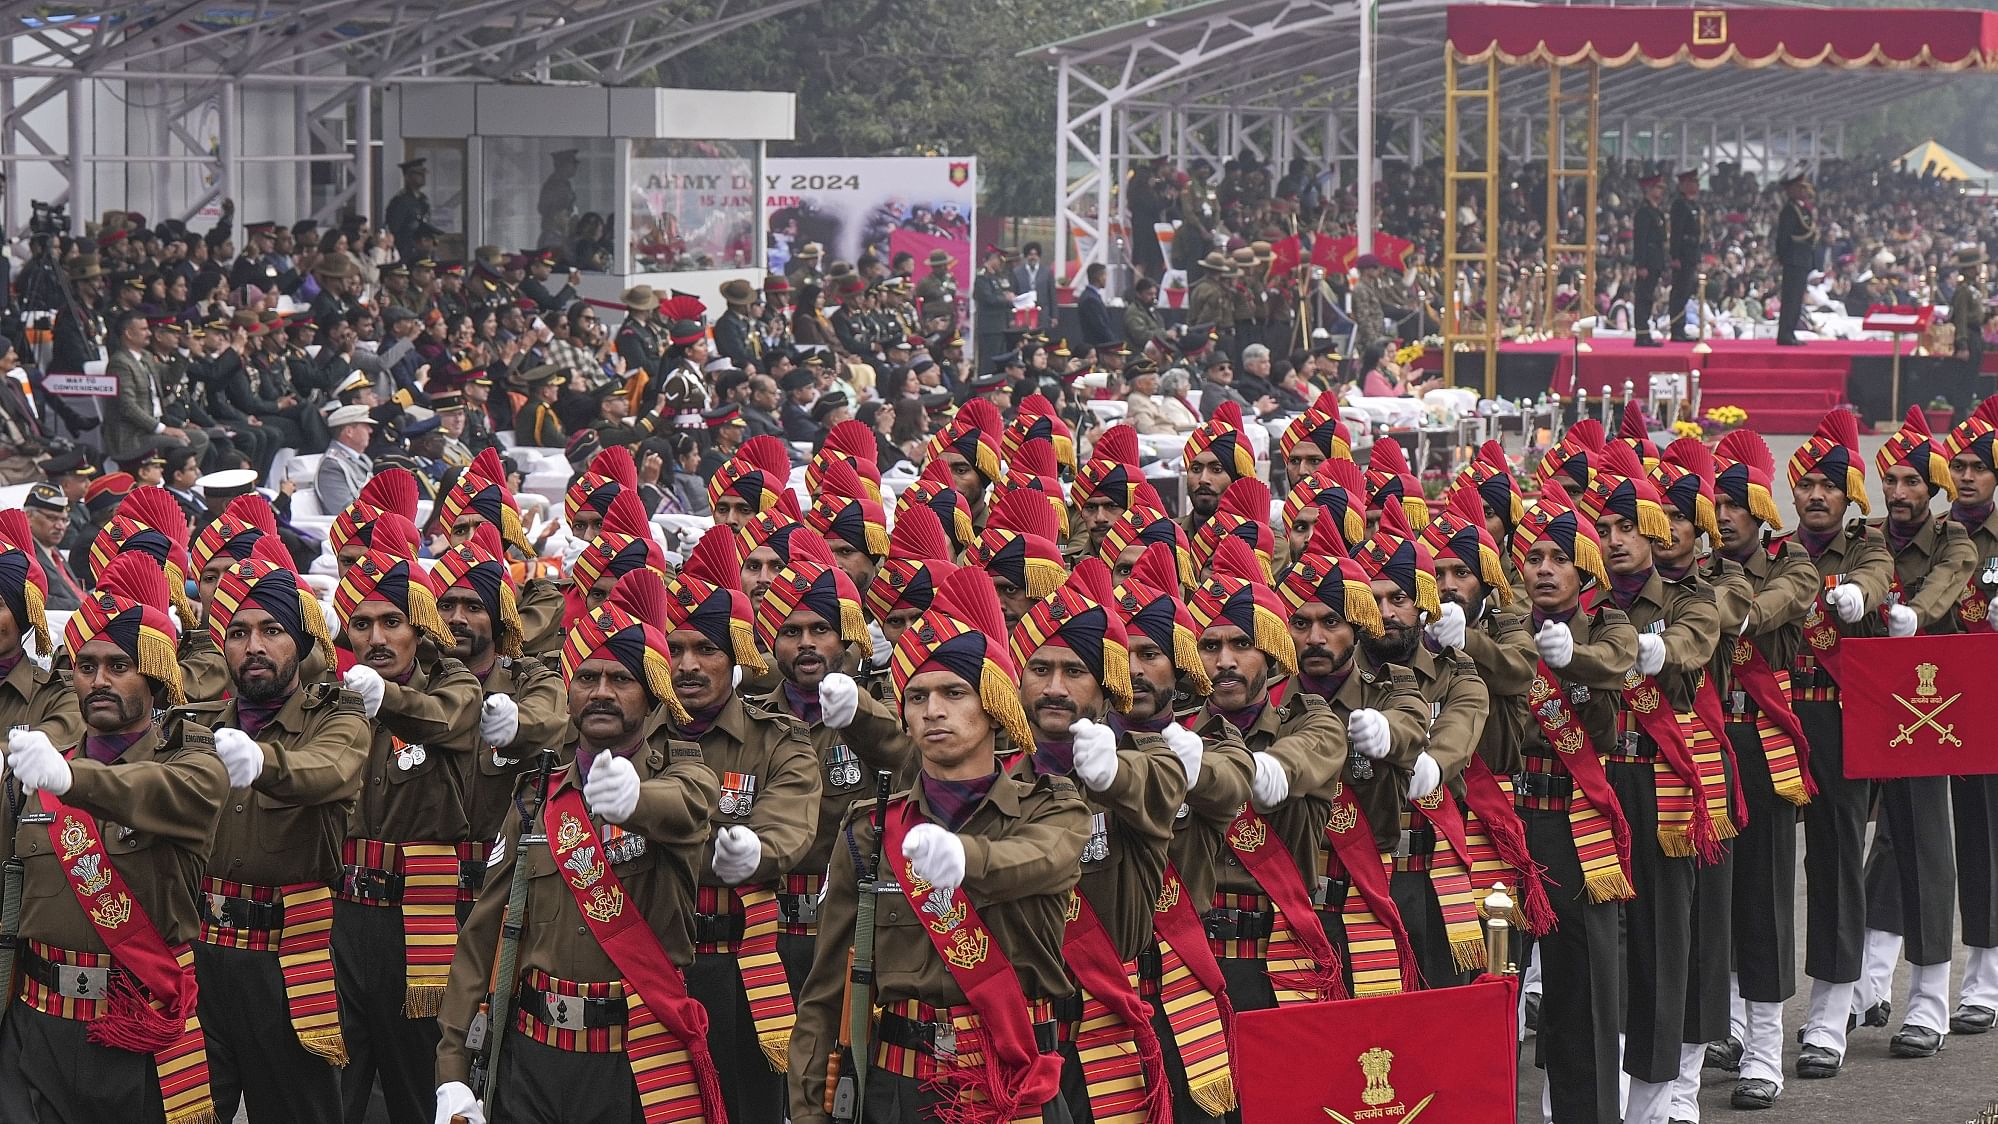 <div class="paragraphs"><p>A contingent marches past during Army Day celebrations at the Parade Ground at 11 GR in Lucknow on Monday, 15 January.</p></div>